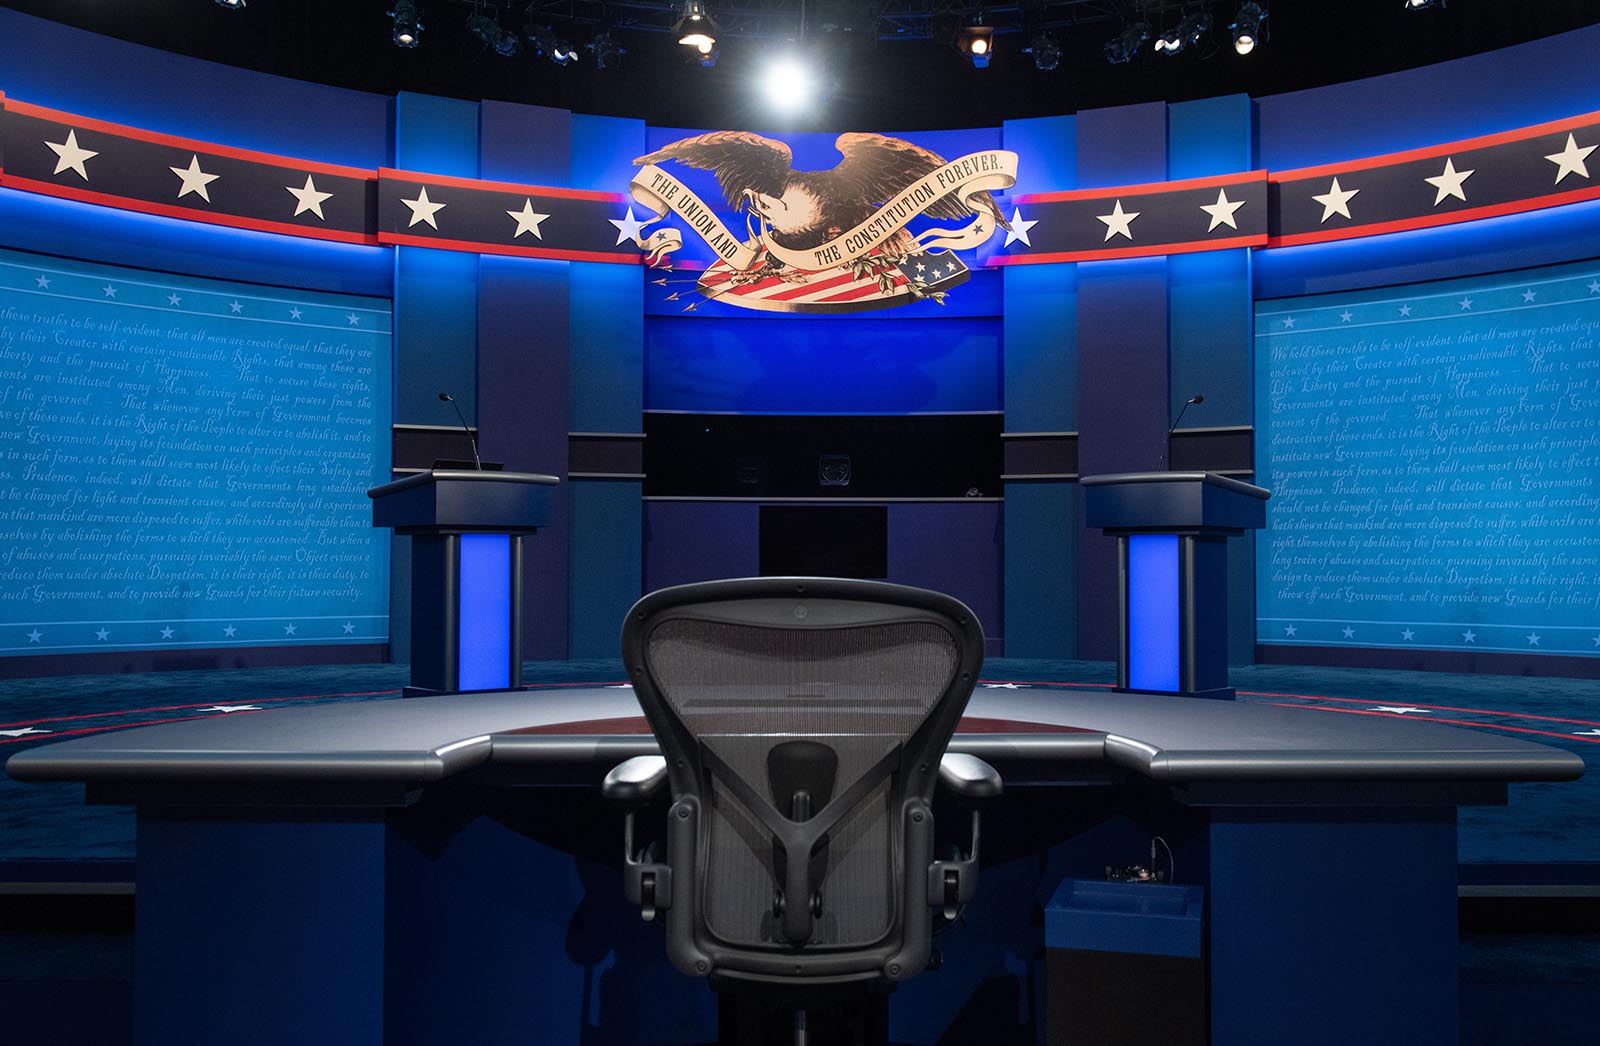 What the inside of the debate hall looks like